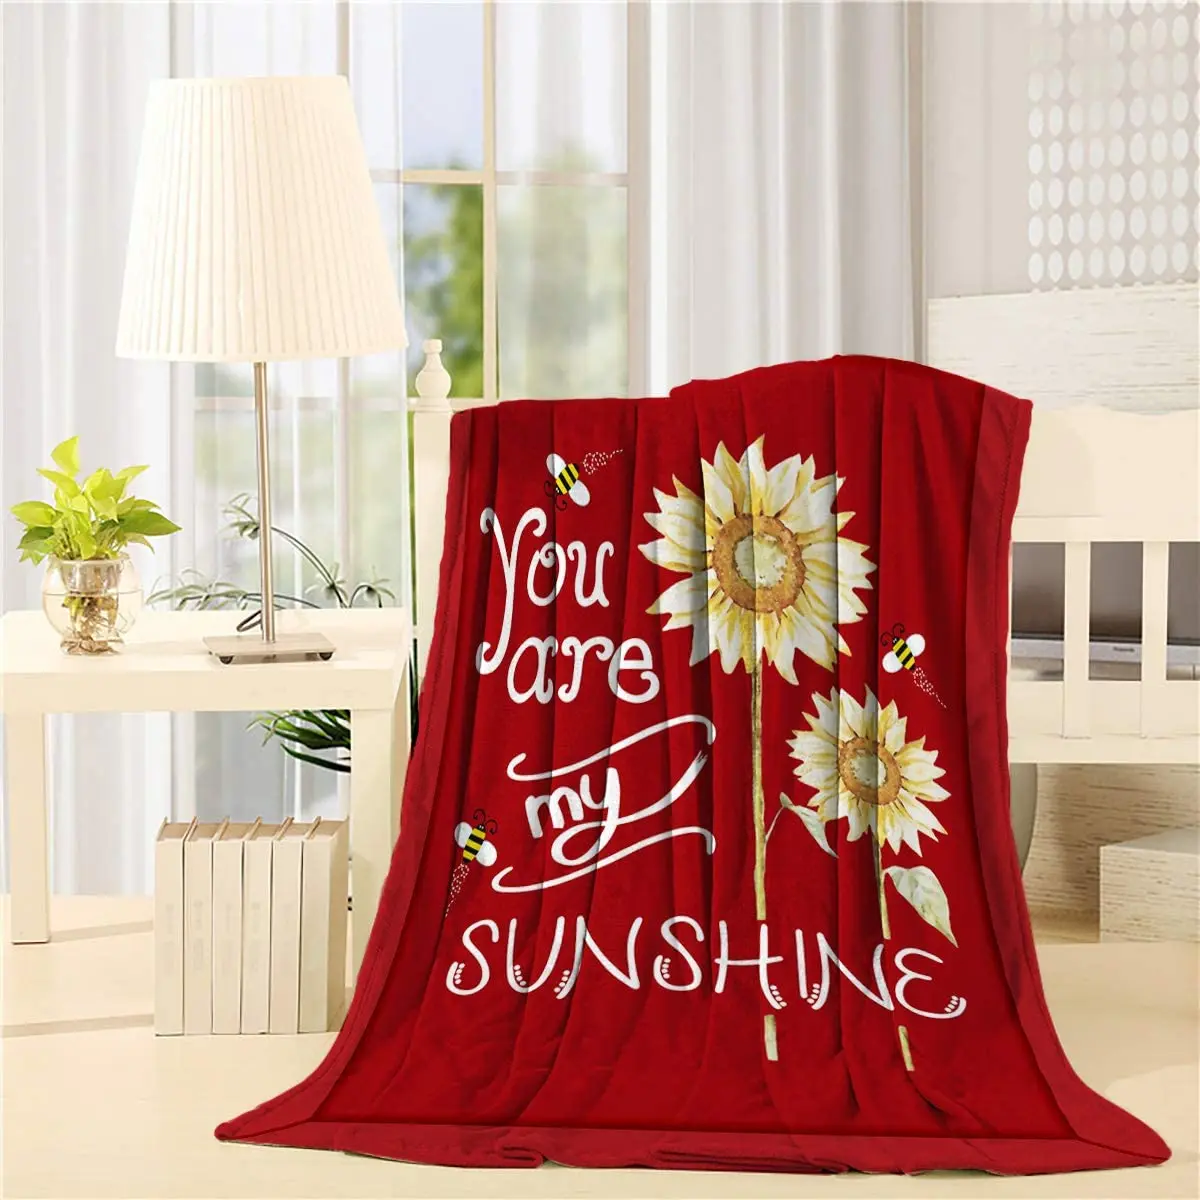 

Sunflower Throw Blanket Black Bed Blankets Plush Fleece Blanket for Couch Sofa Bed, You are My Sunshine Blanket Comfy Microfiber